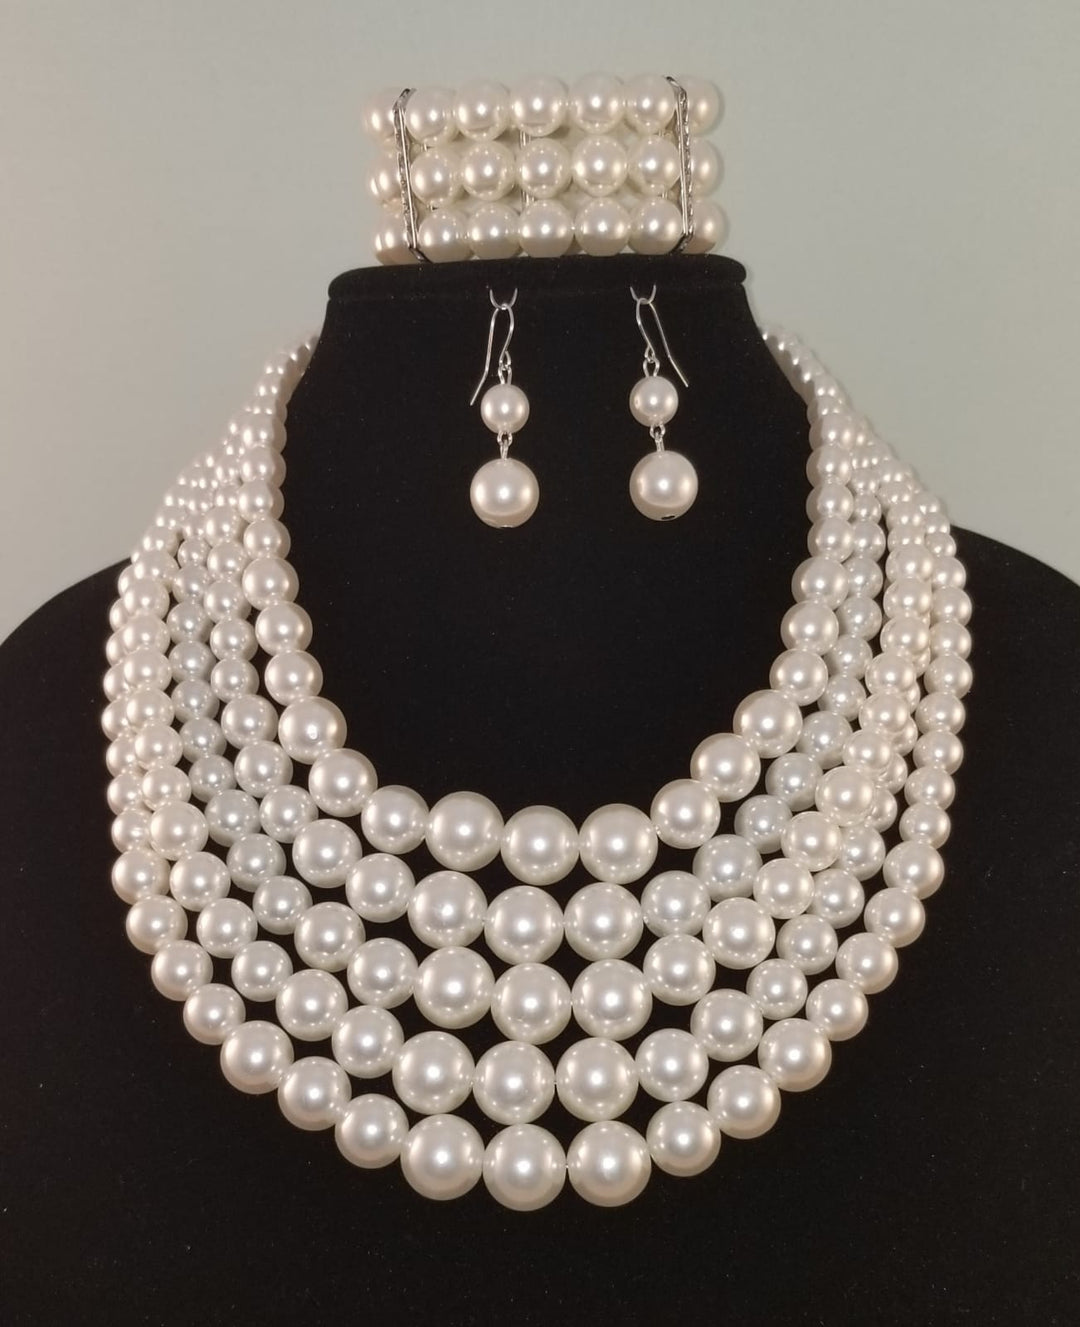 3 pc Five Layer White Pearl Necklace Set